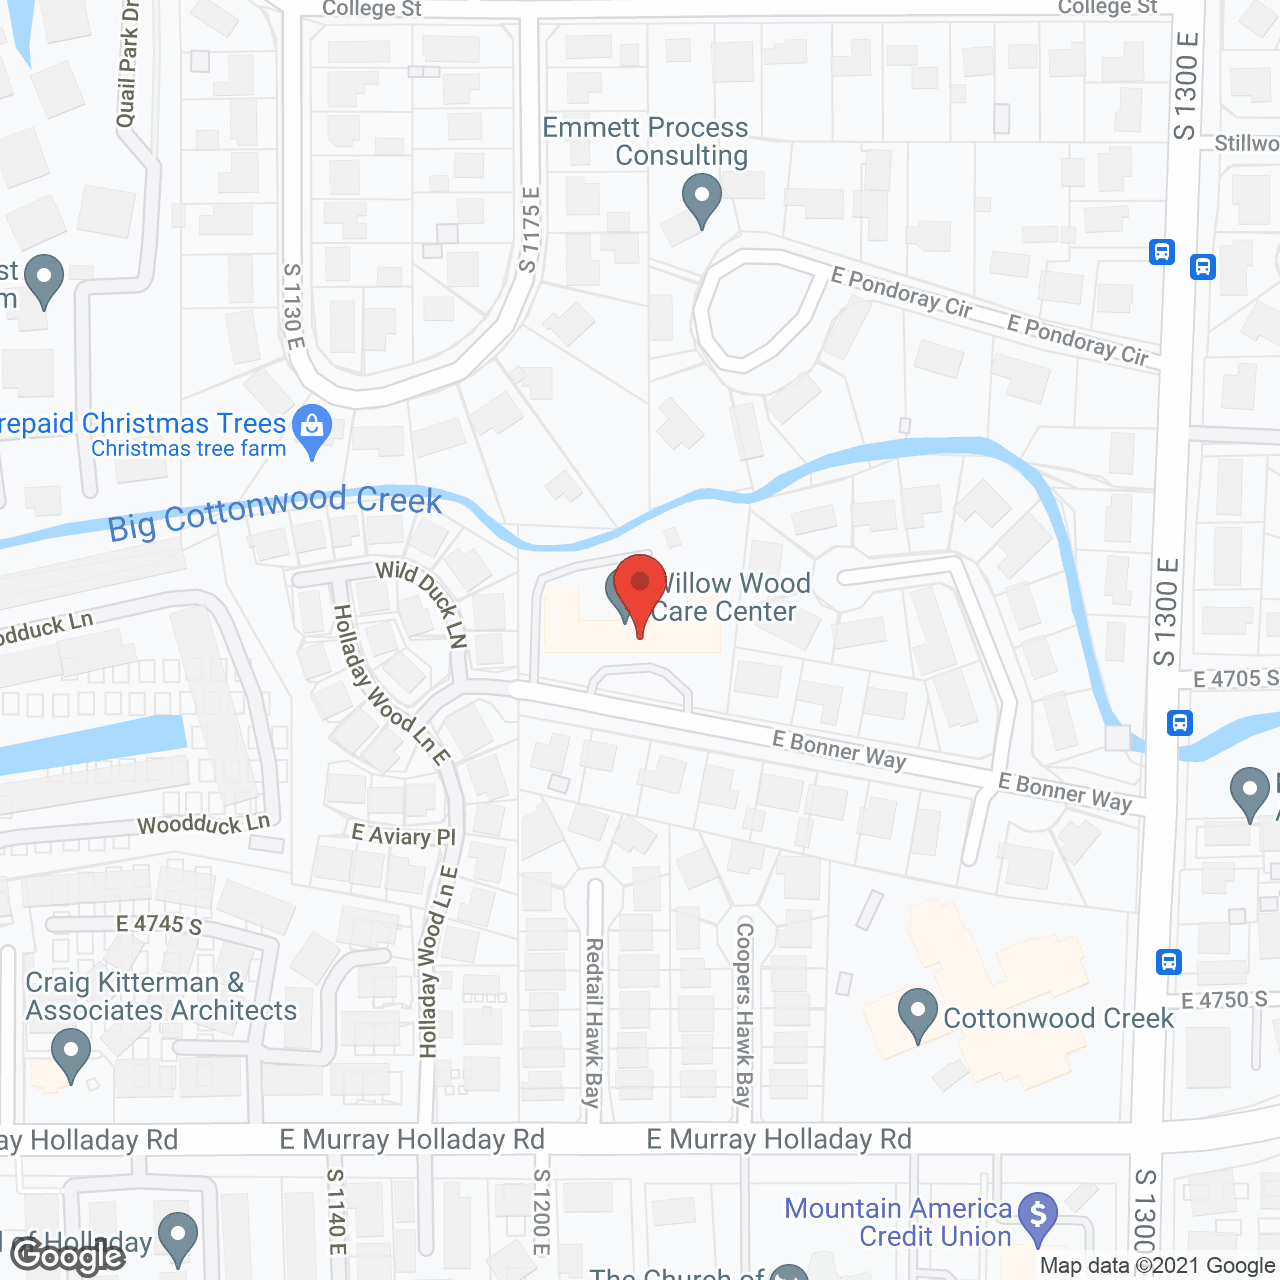 Willow Wood Care Center in google map